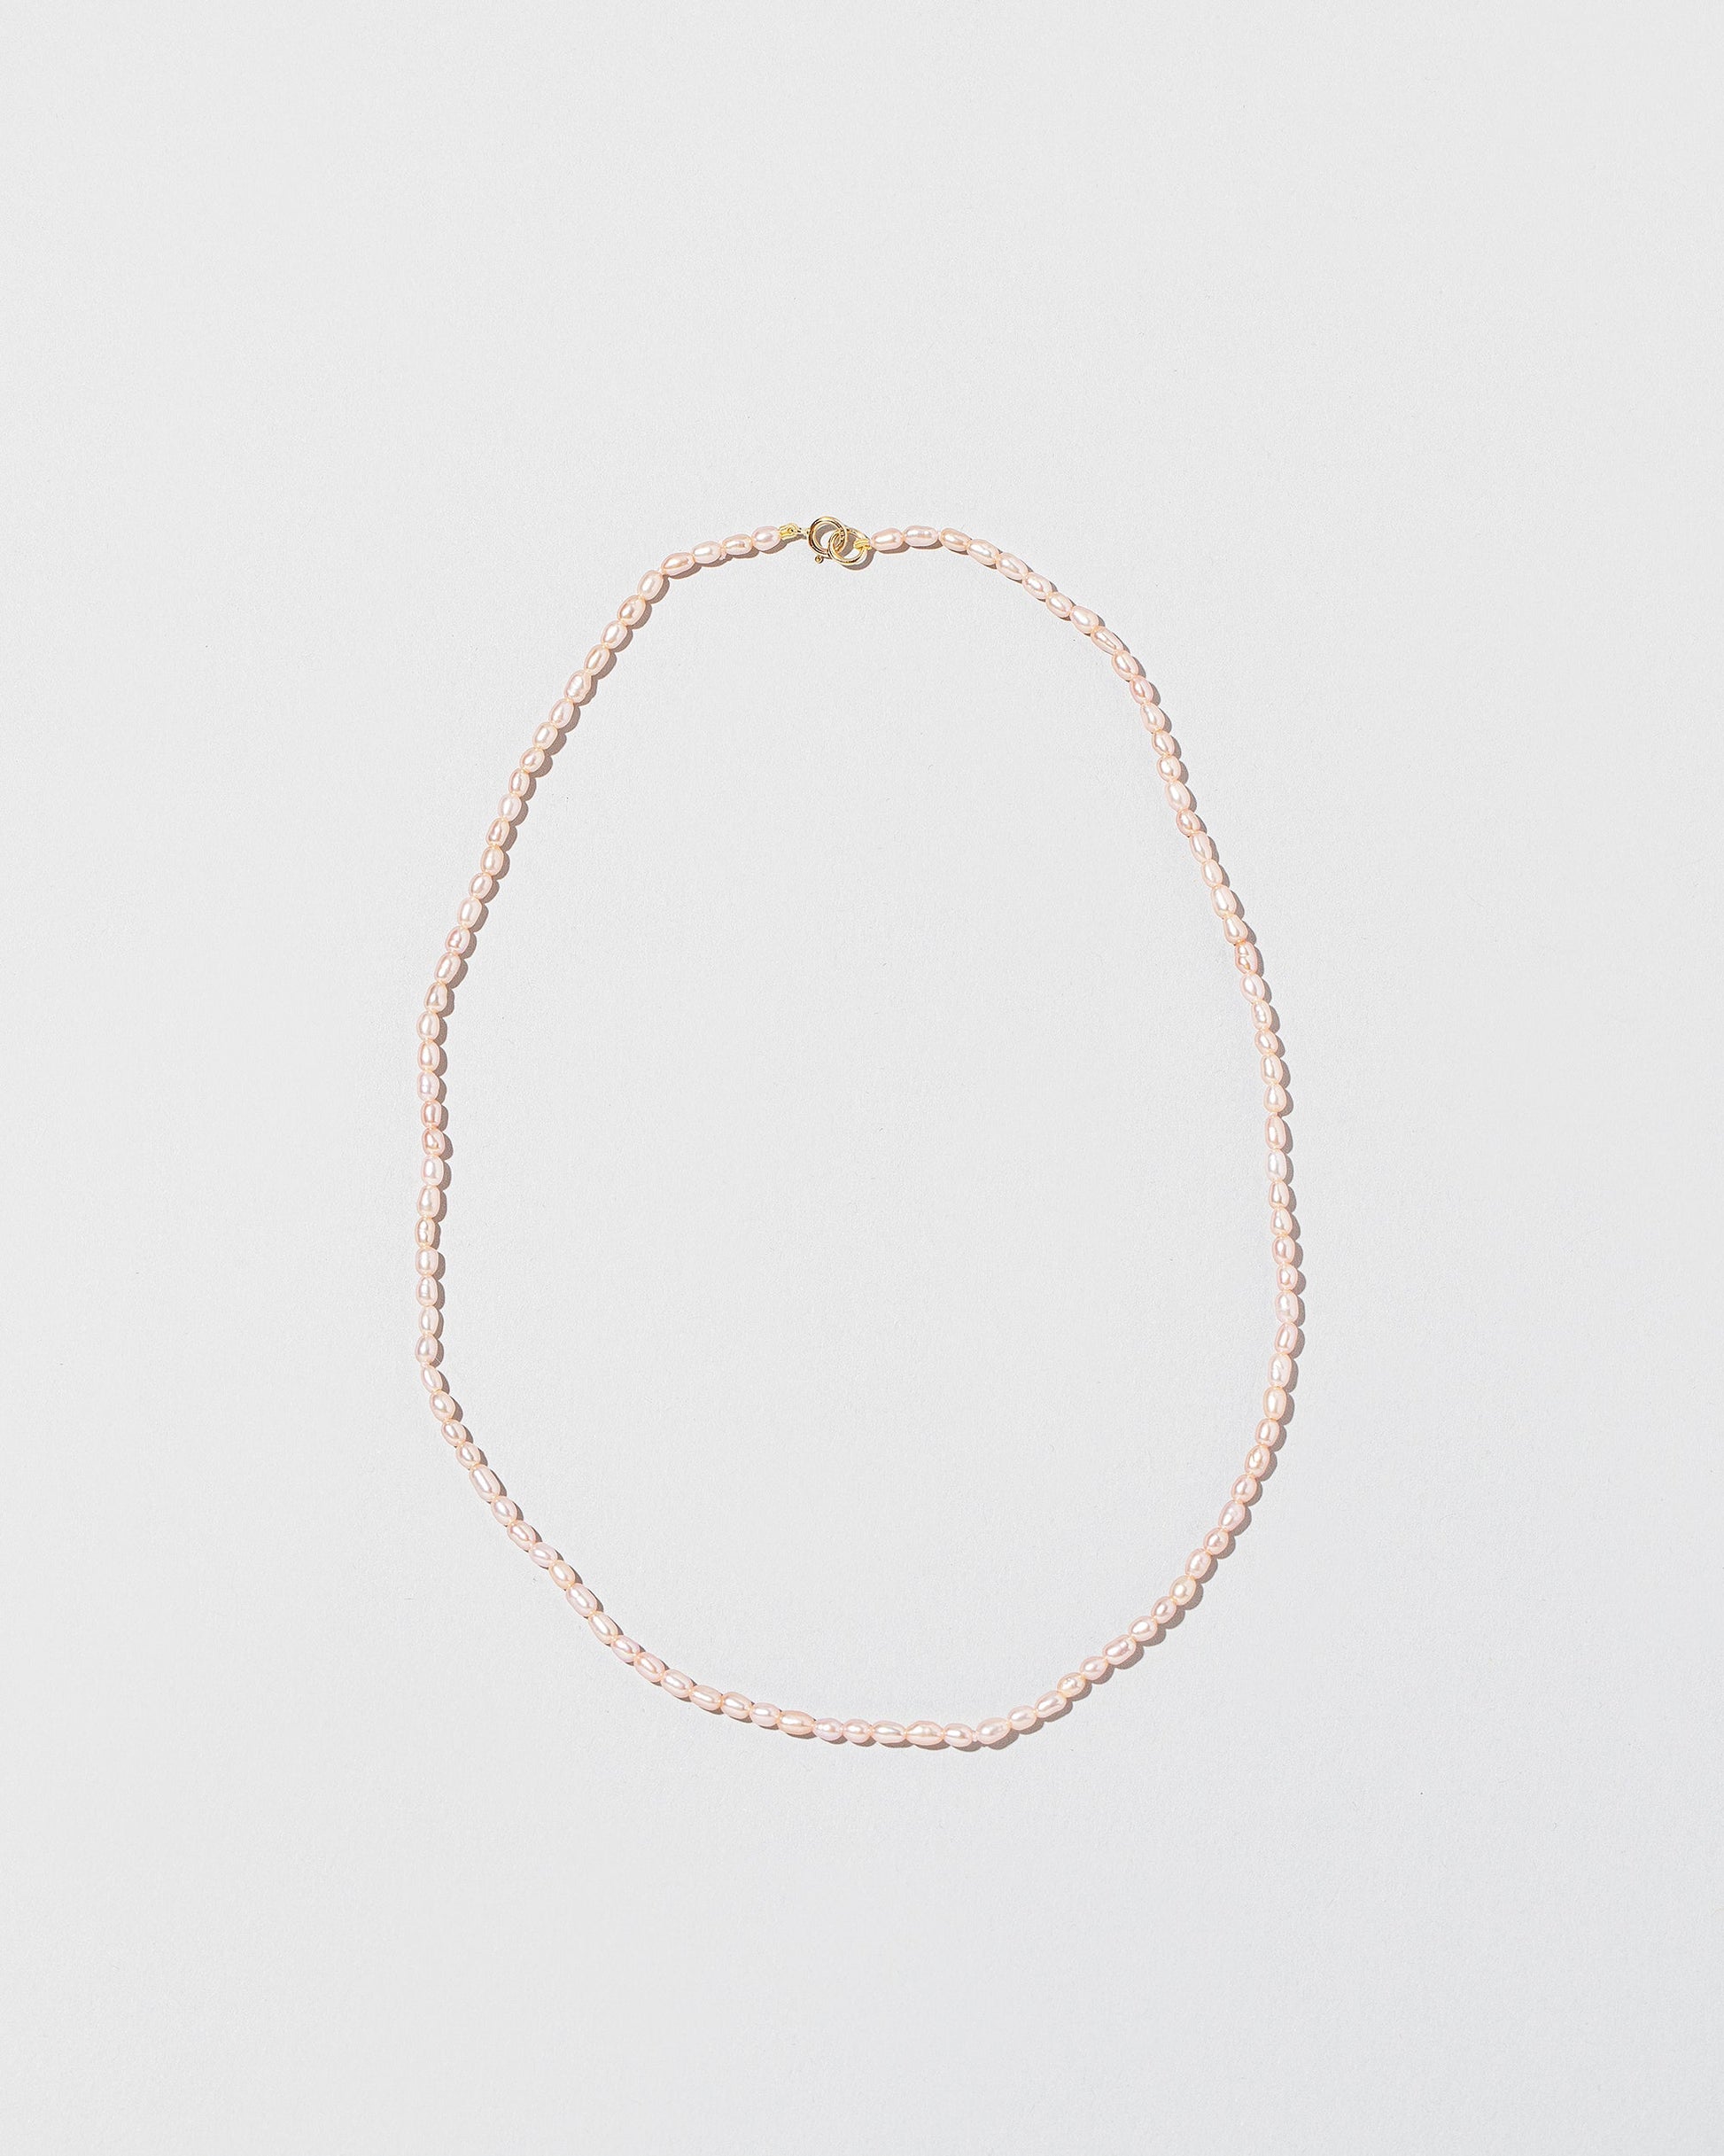 Dainty Pearl Choker, Rose Gold Necklace, Bridal Wedding Jewelry